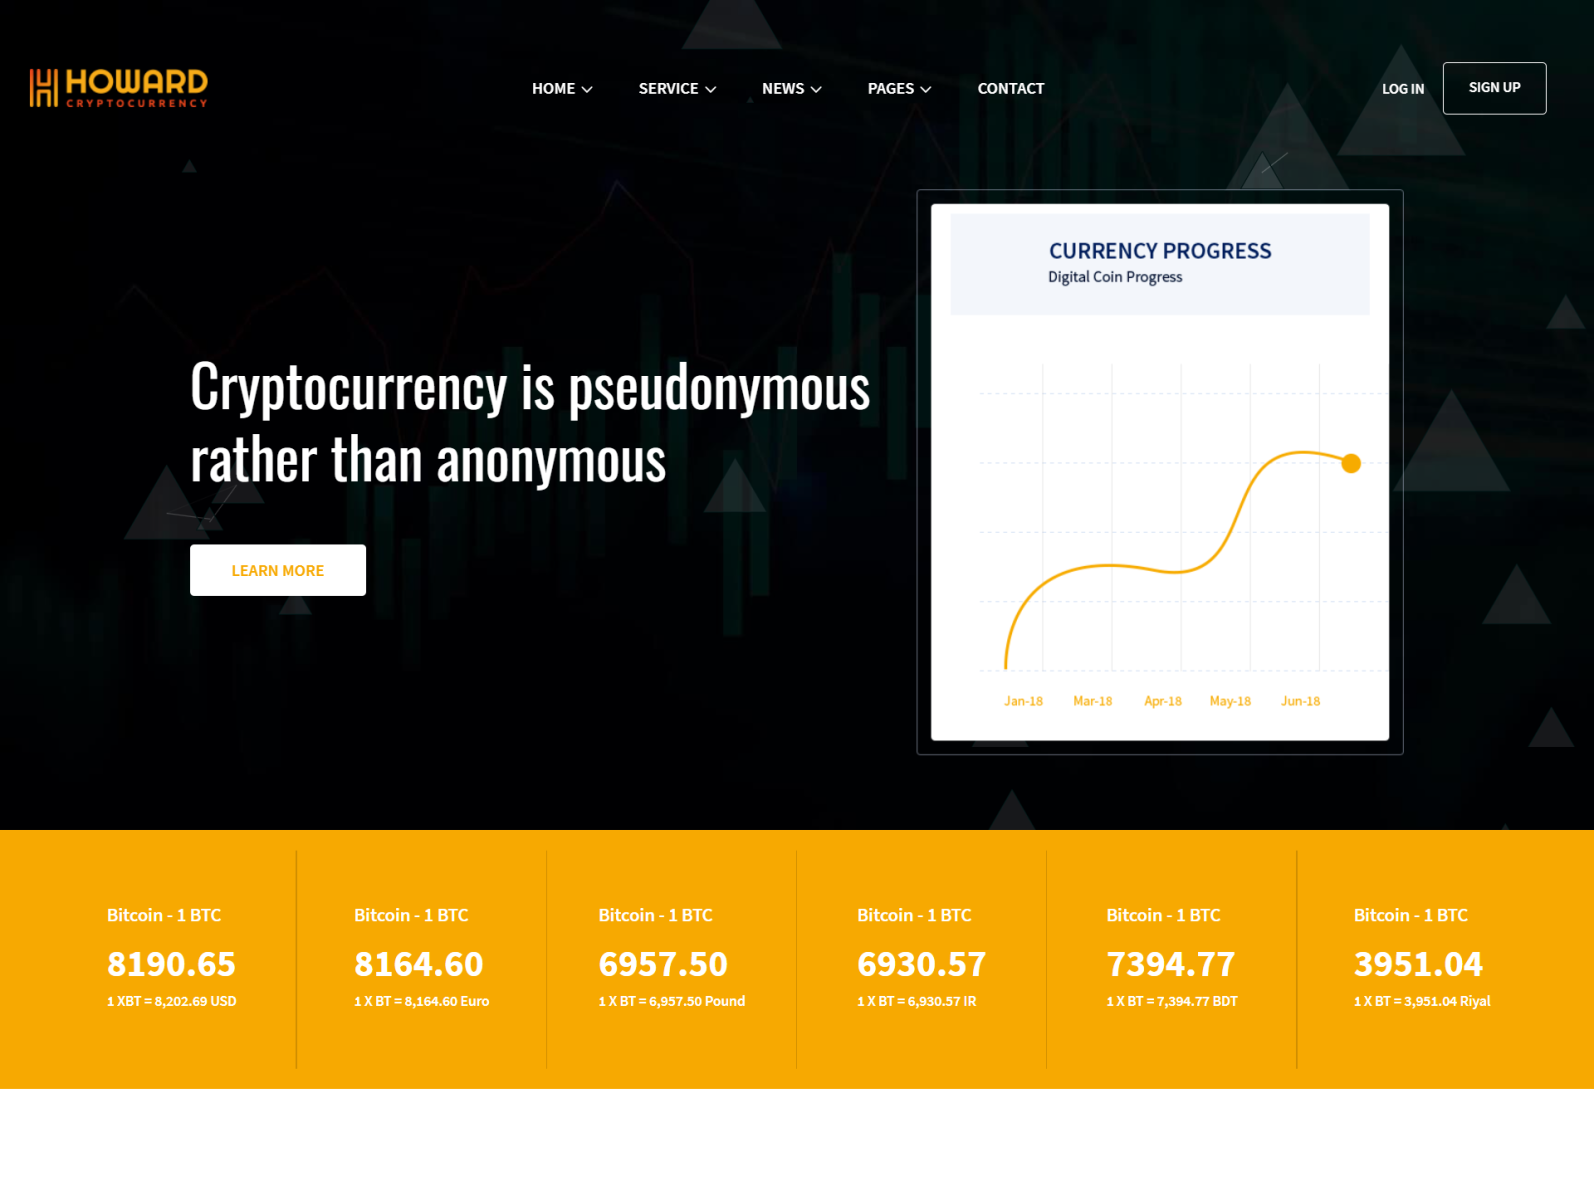 javascript crypto currency miner